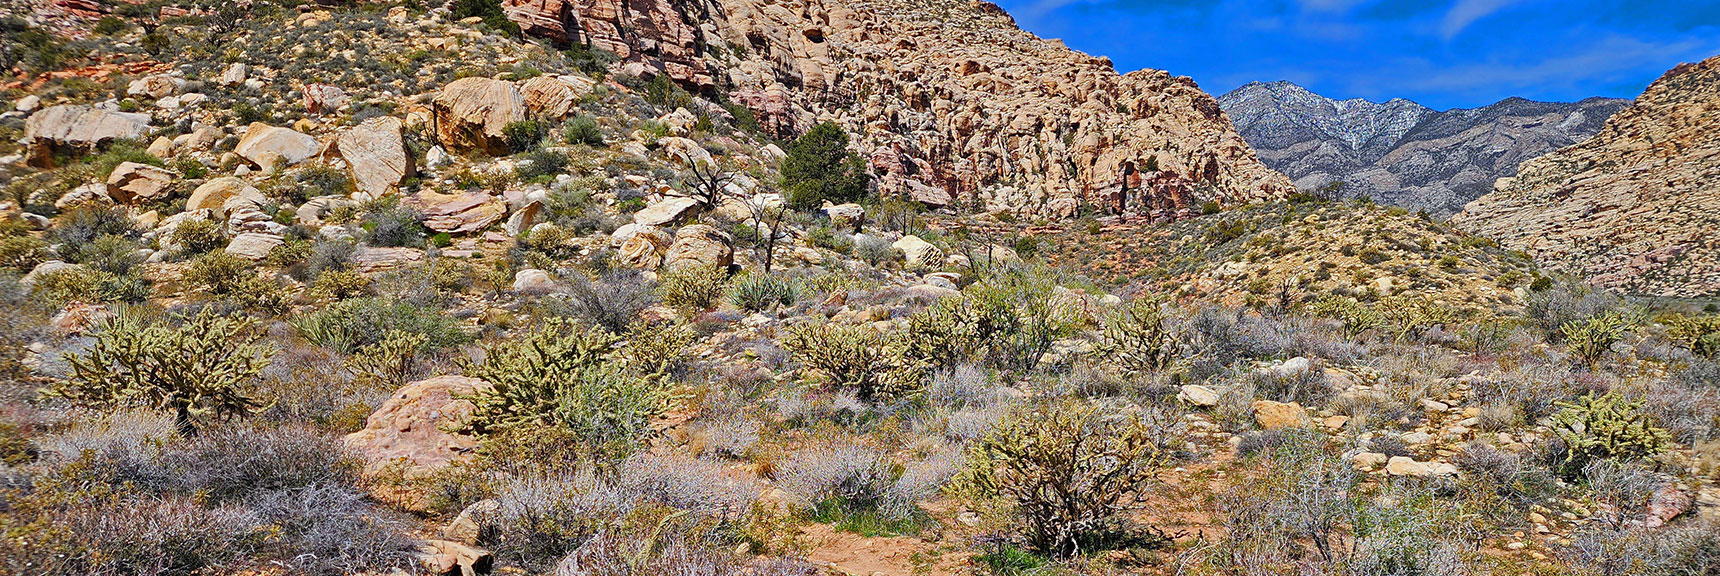 Not Far from Ice Box Canyon's Lush Pine Forest the Landscape Dramatically Changes | SMYC Trail | Red Rock Canyon National Conservation Area, Nevada | David Smith | LasVegasAreaTrails.com